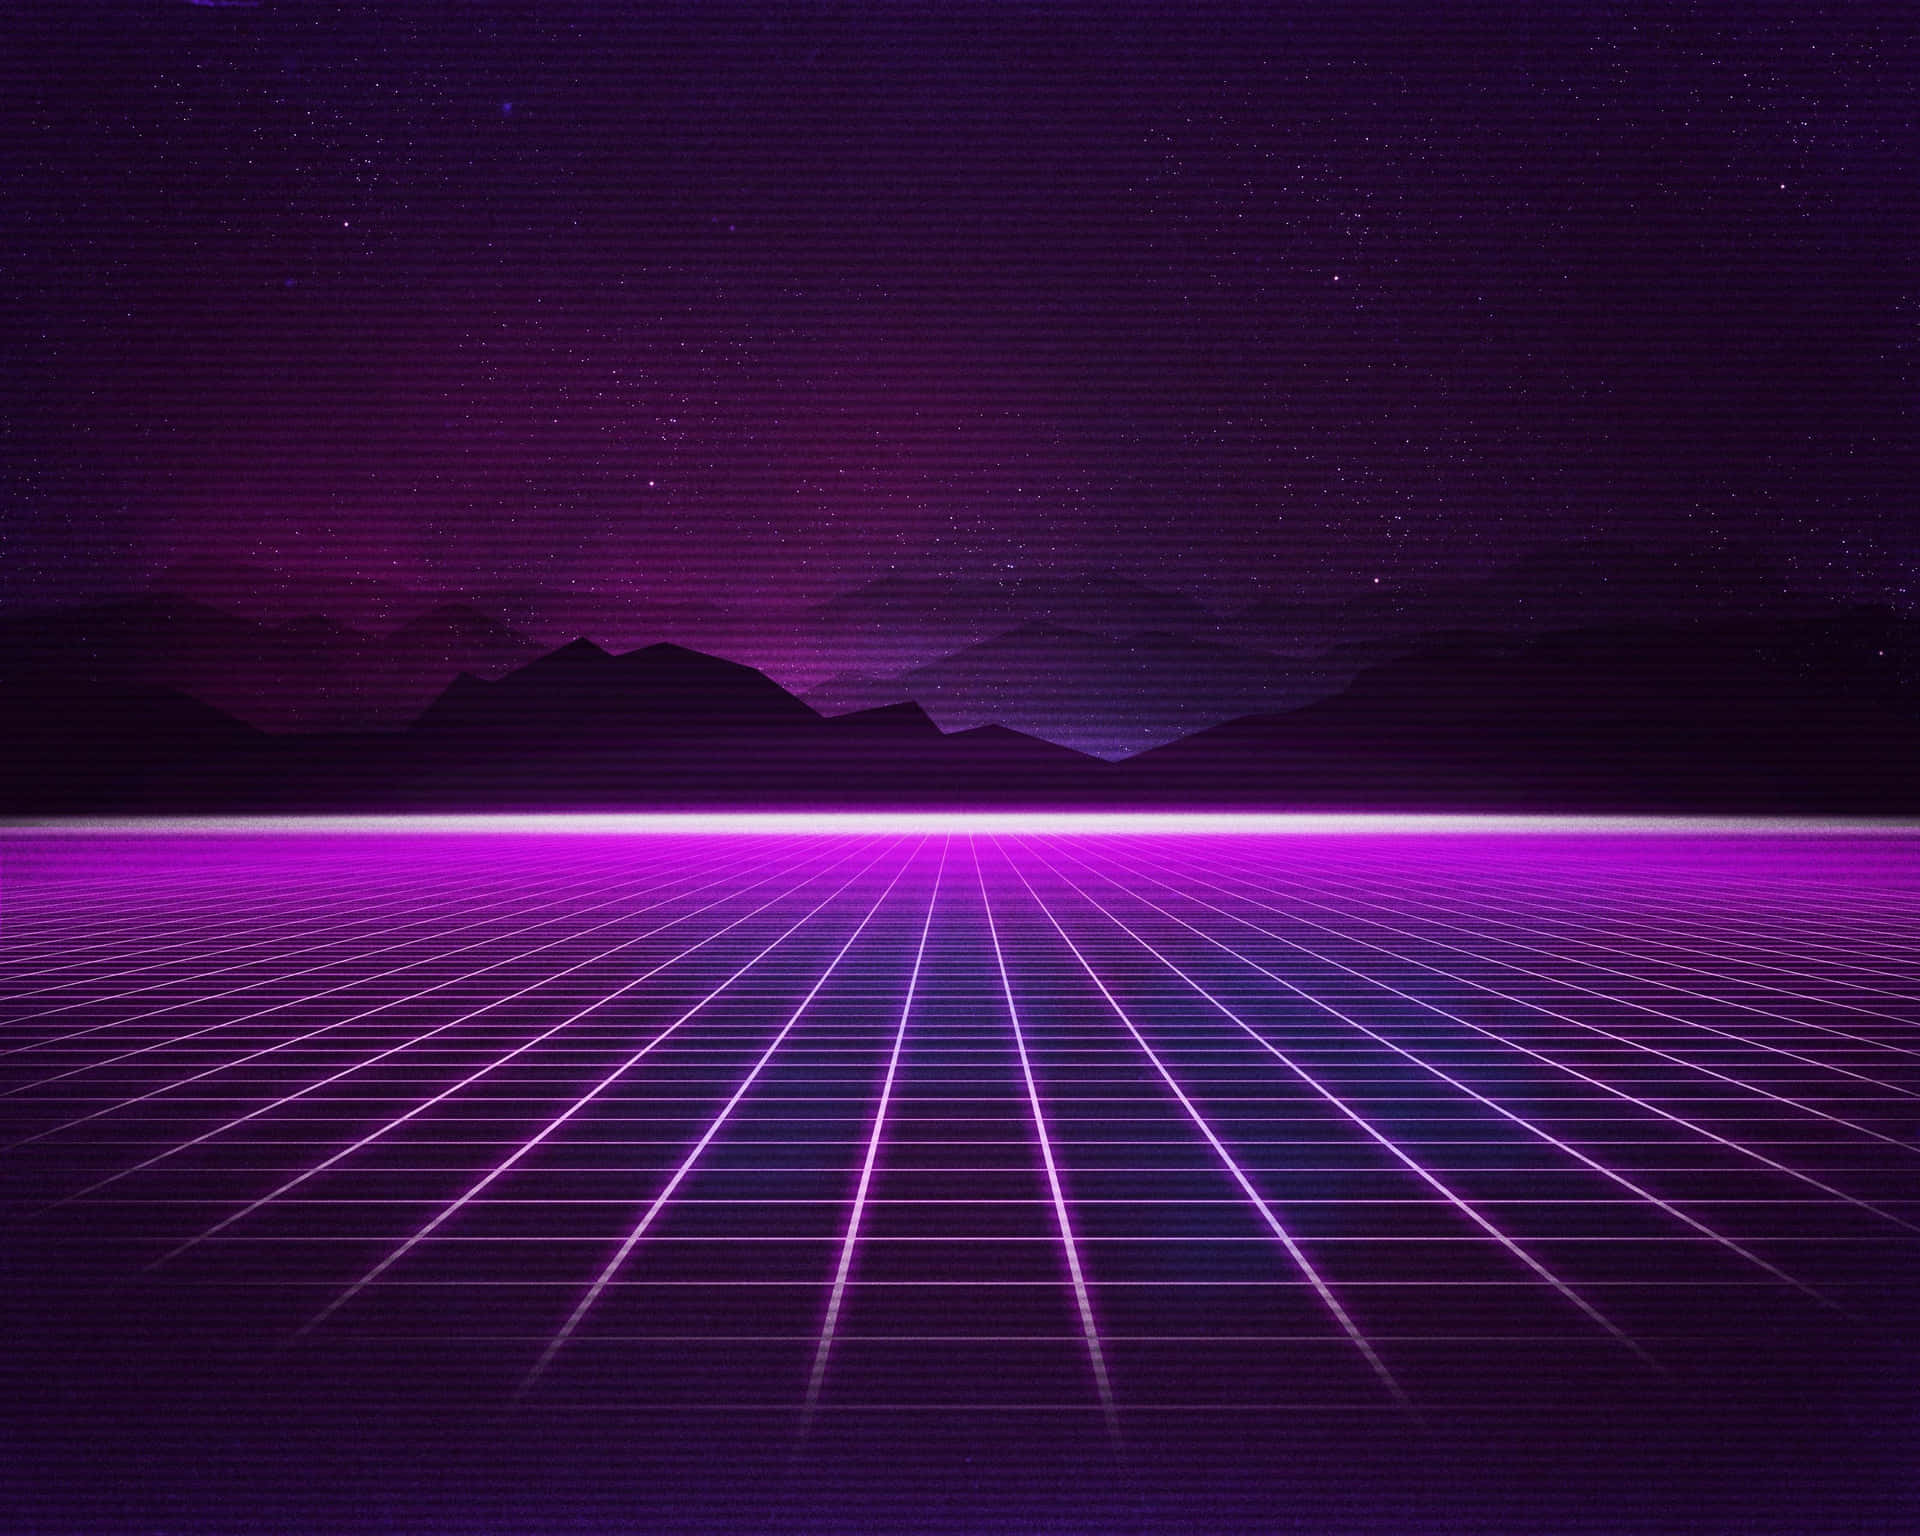 Aesthetic Pink Grid Background